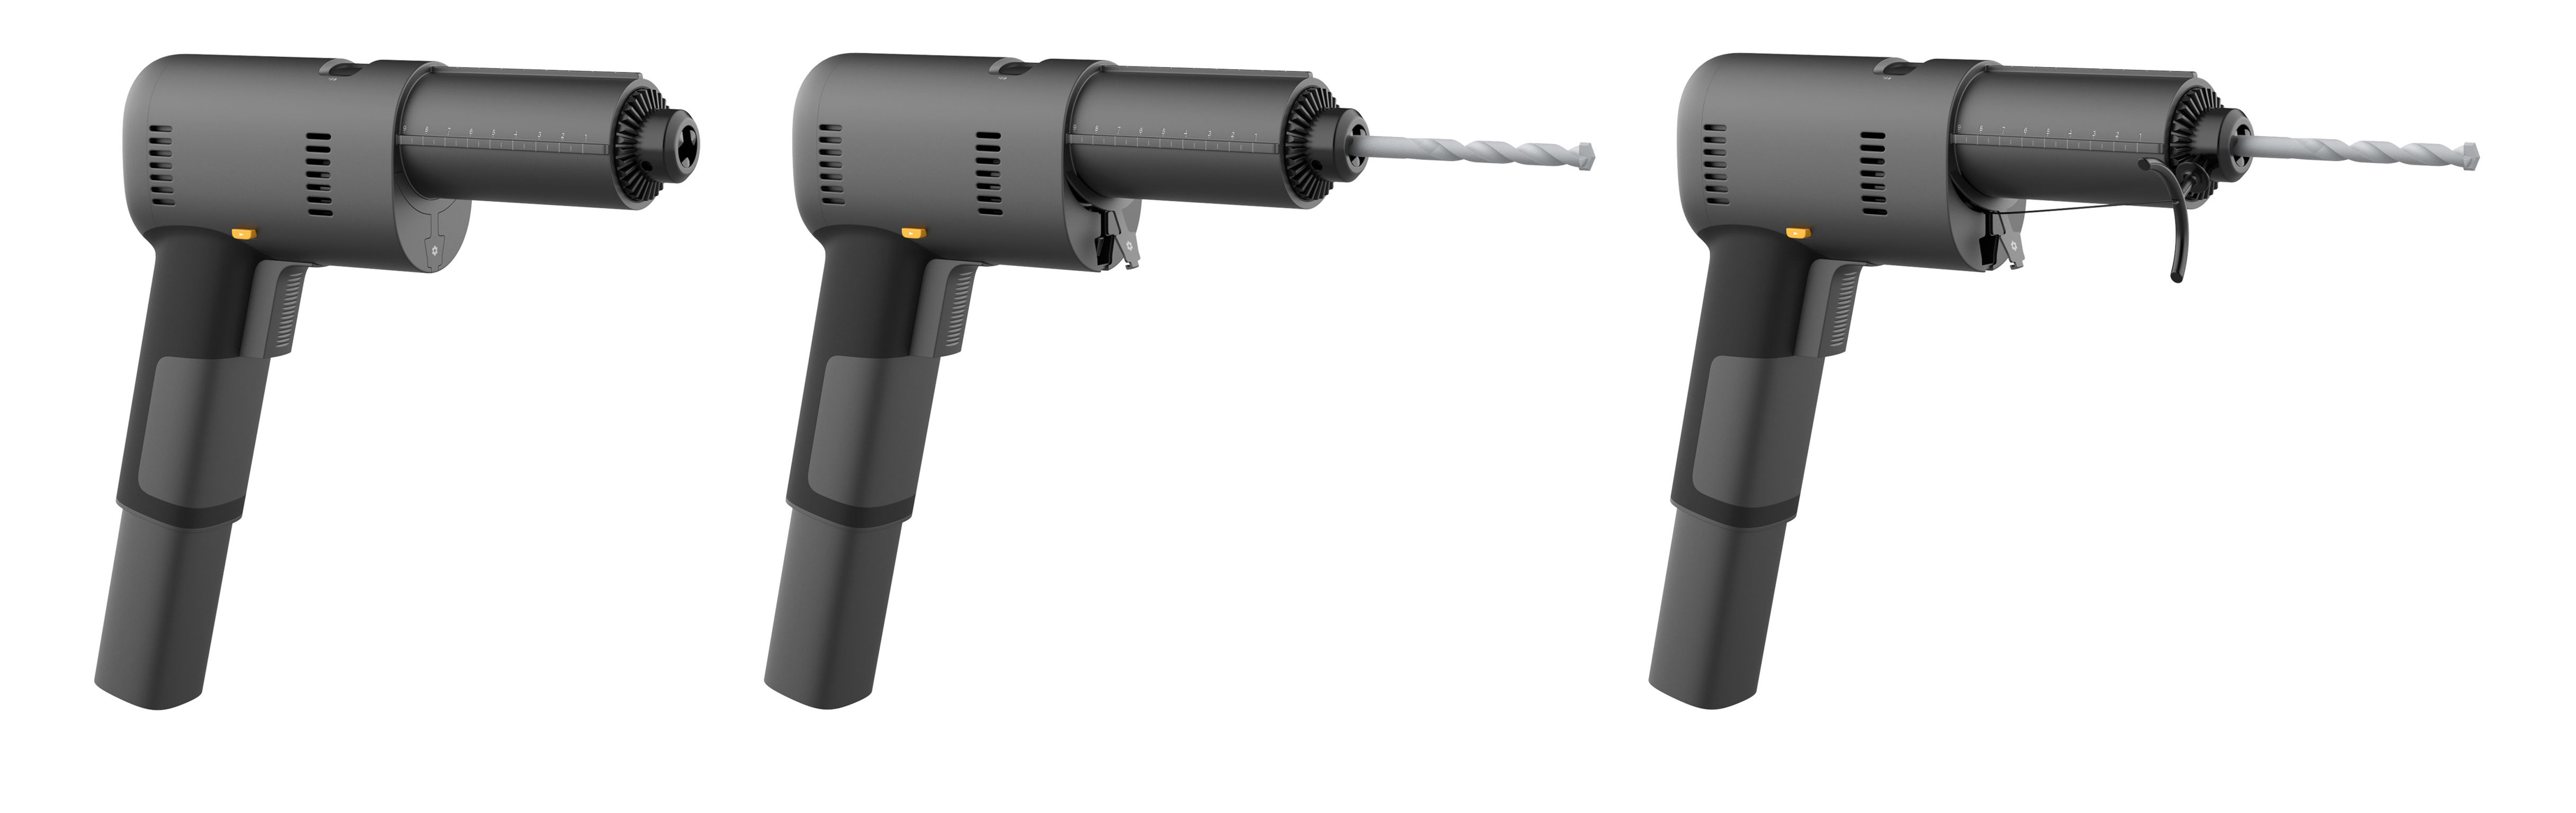 impact drill for dust proof & vertical positioning